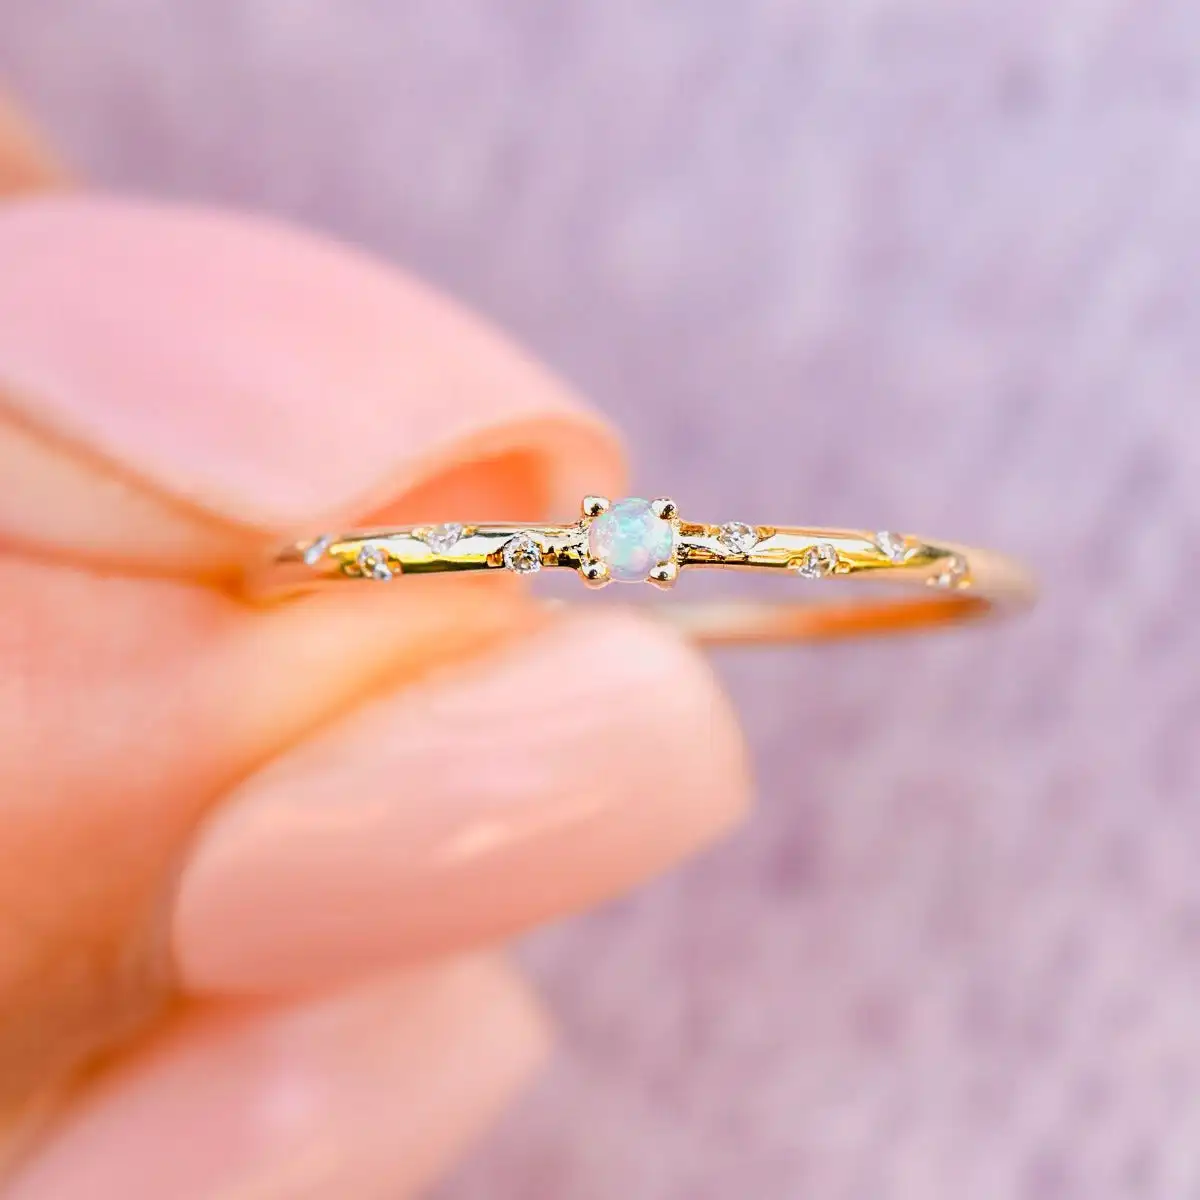 

S925 Sterling Silver Dainty Starry Birthstone Ring - A Delicate and Meaningful Accessory for Women